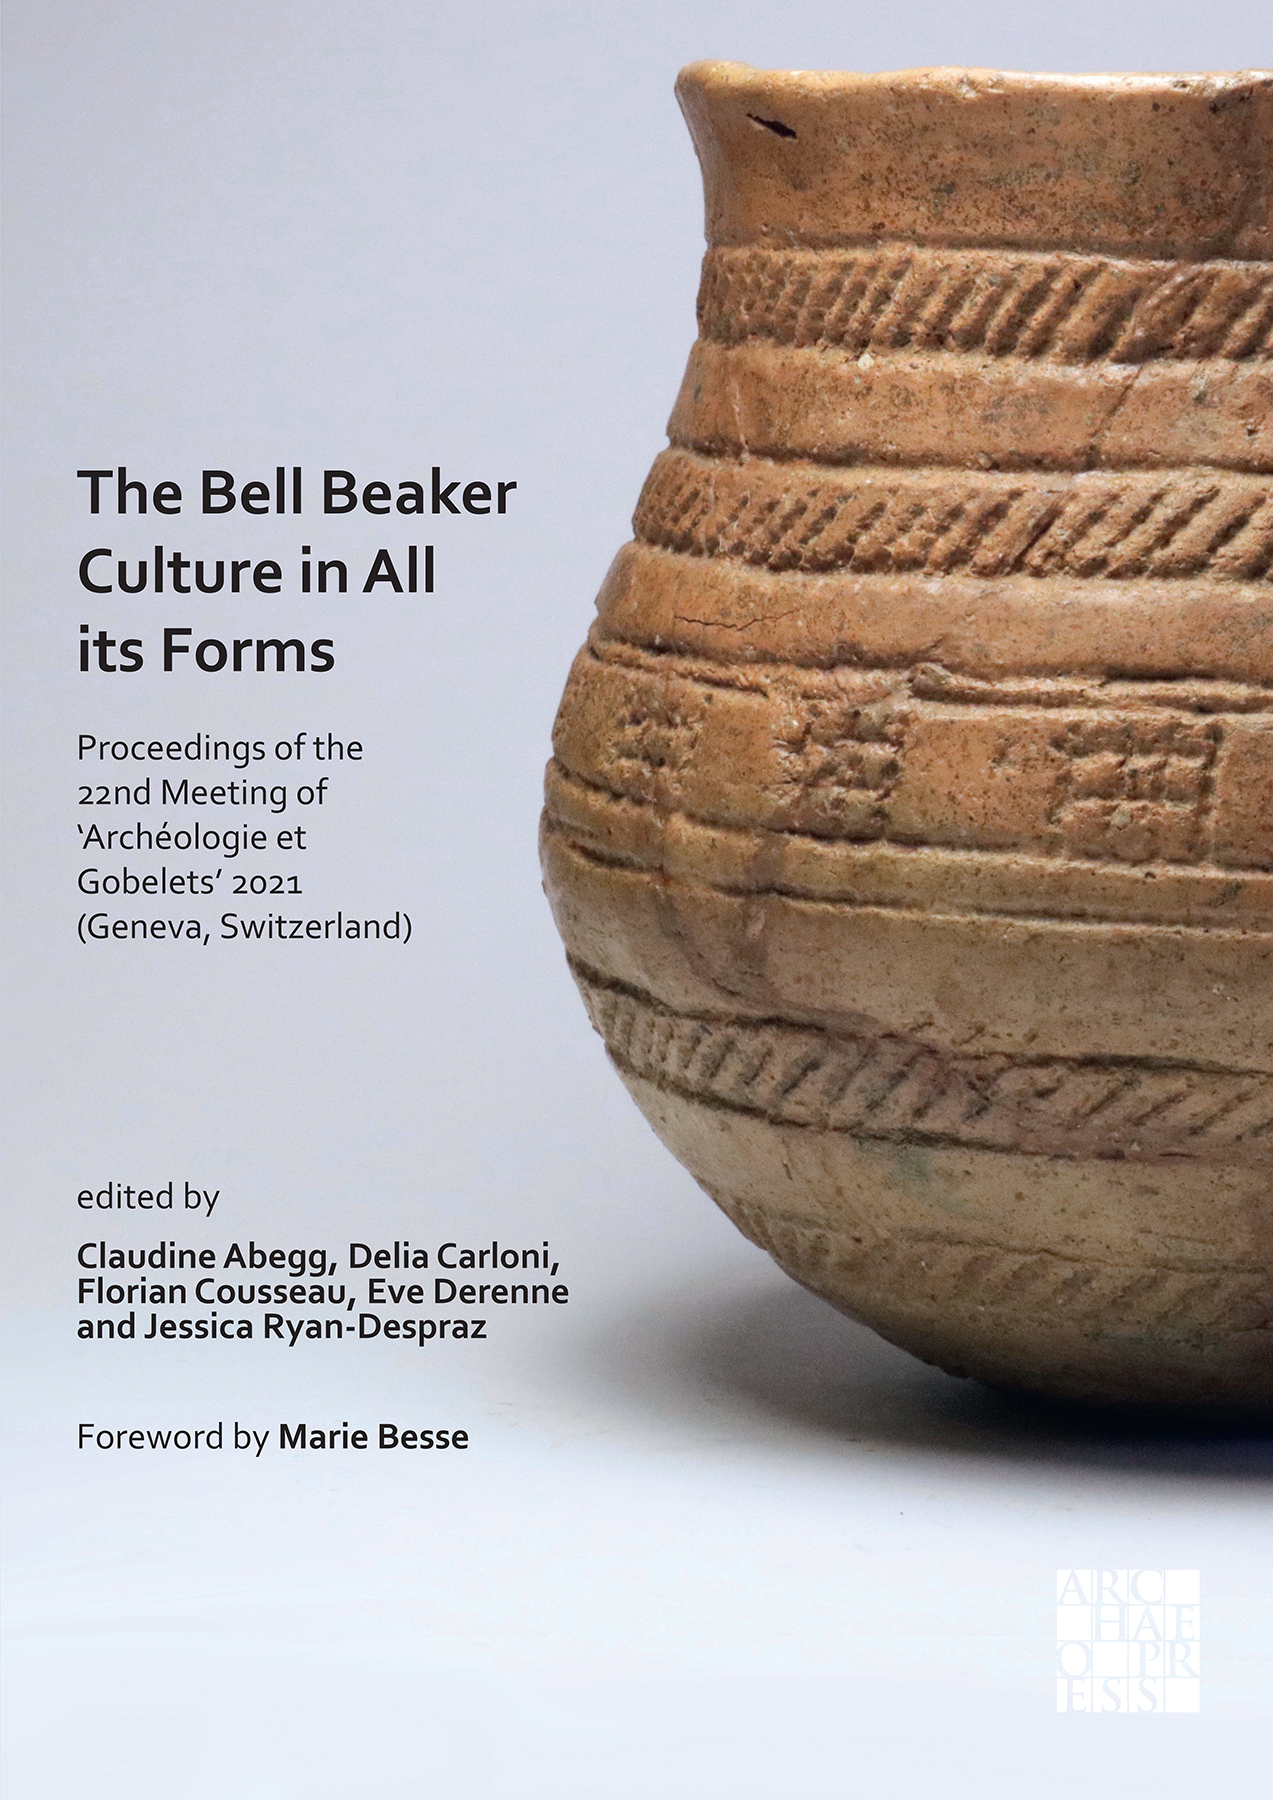 The Bell Beaker Culture in All Its Forms, (actes 22e Meeting 'Archéologie et Gobelets' 2021, Genève, Suisse), 2022, 320 p.